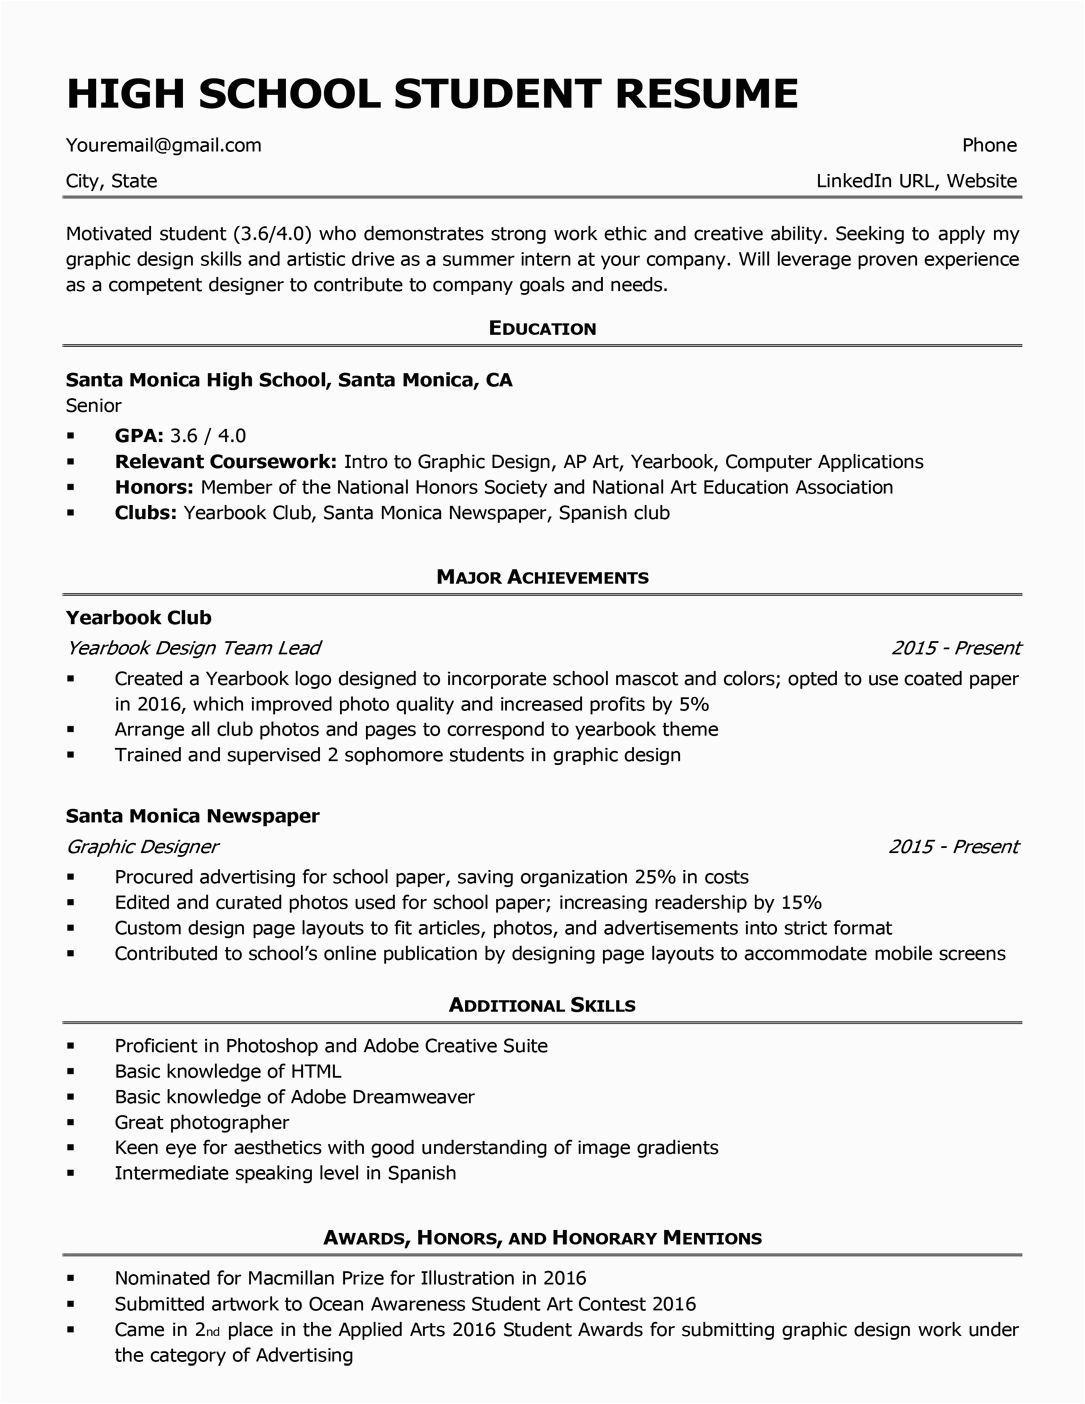 Sample Resume for A Student In High School High School Resume Template & Writing Tips